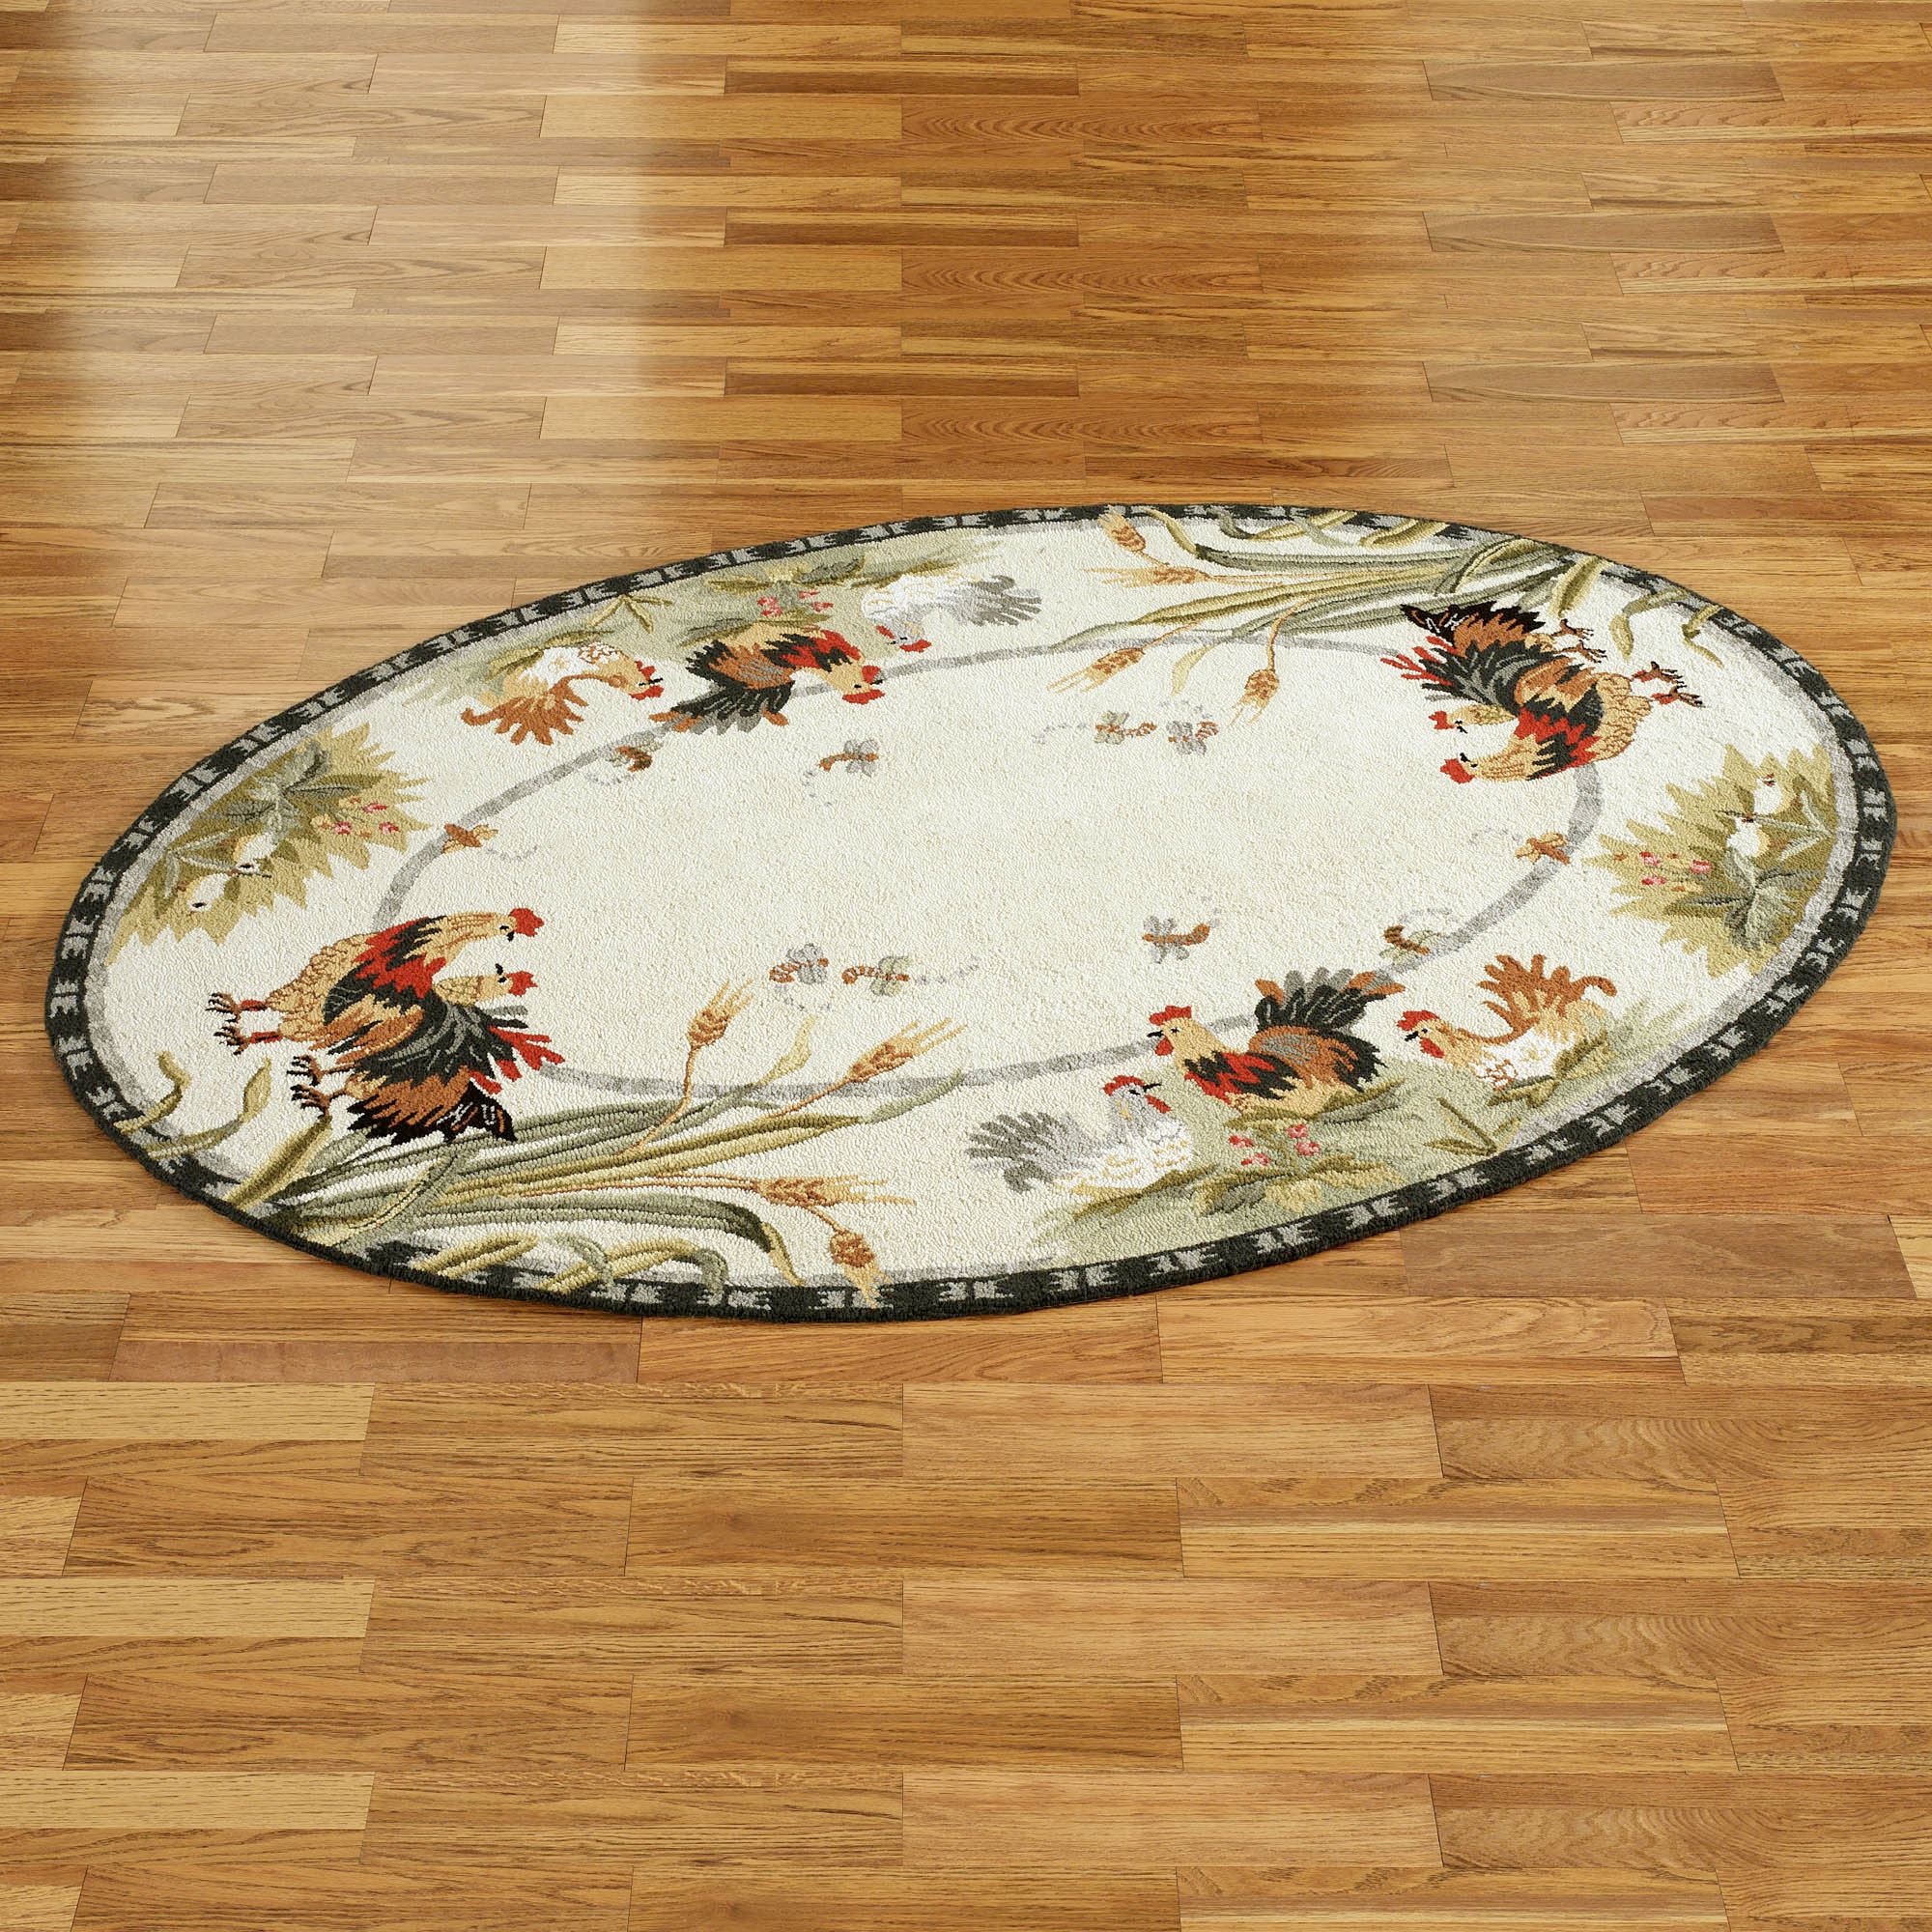 Rooster and Hens Oval Rug